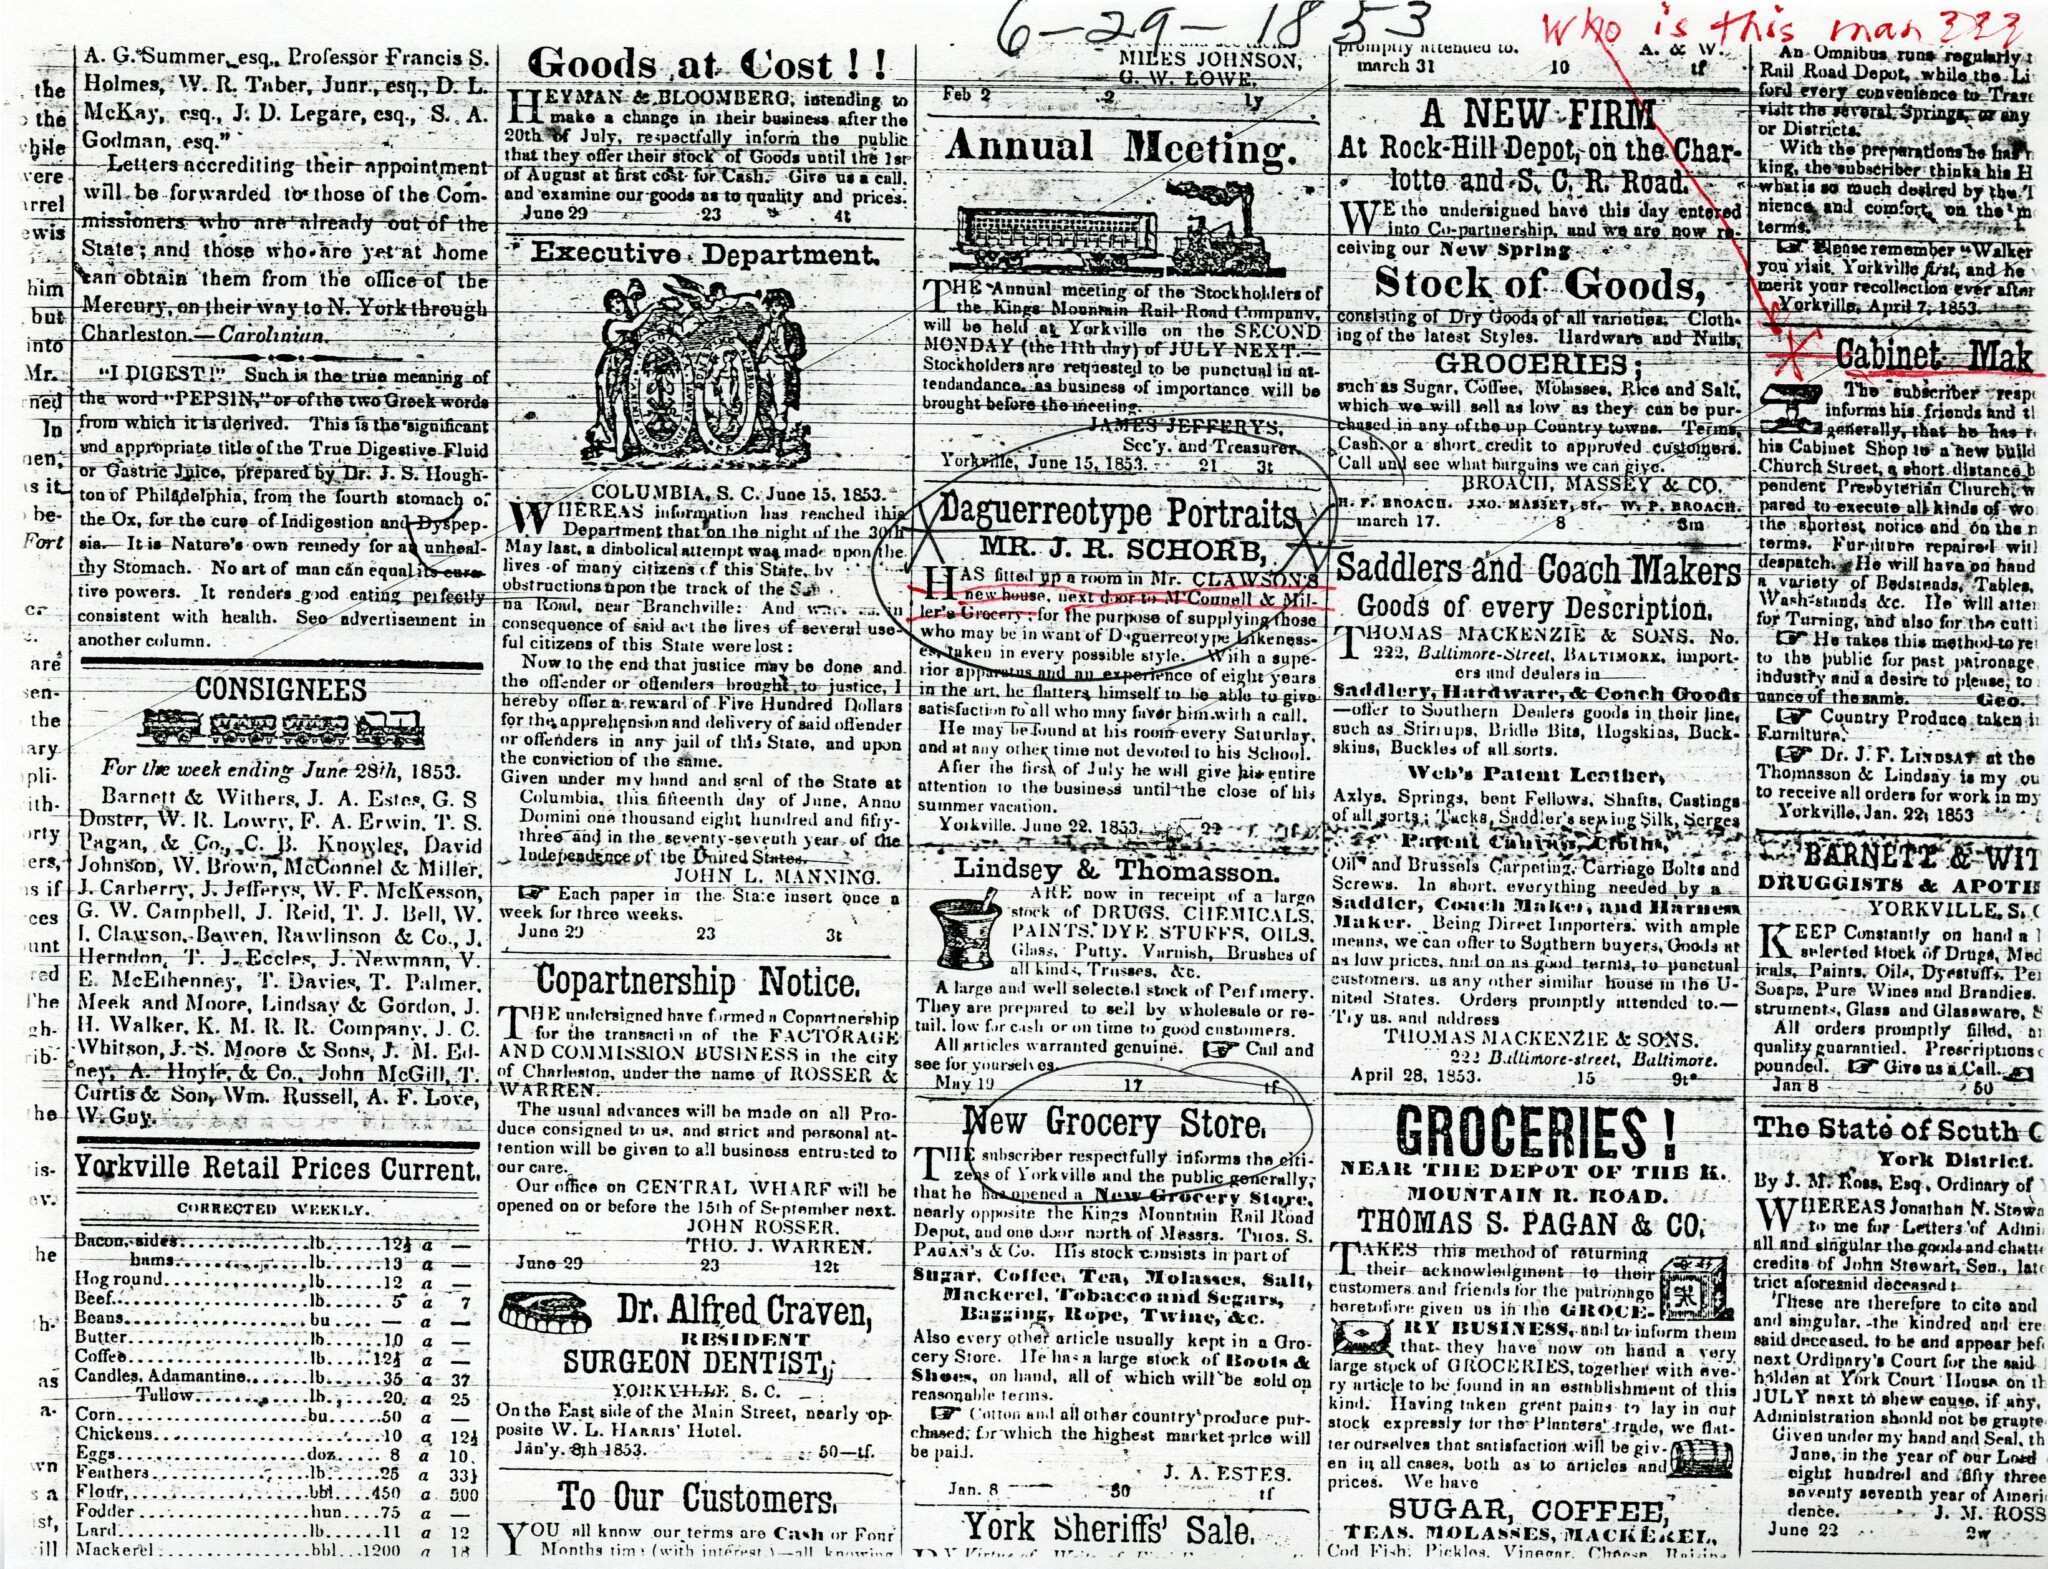 SCHORB ADVERTISES IN THE YORKVILLE ENQUIRER - 1853